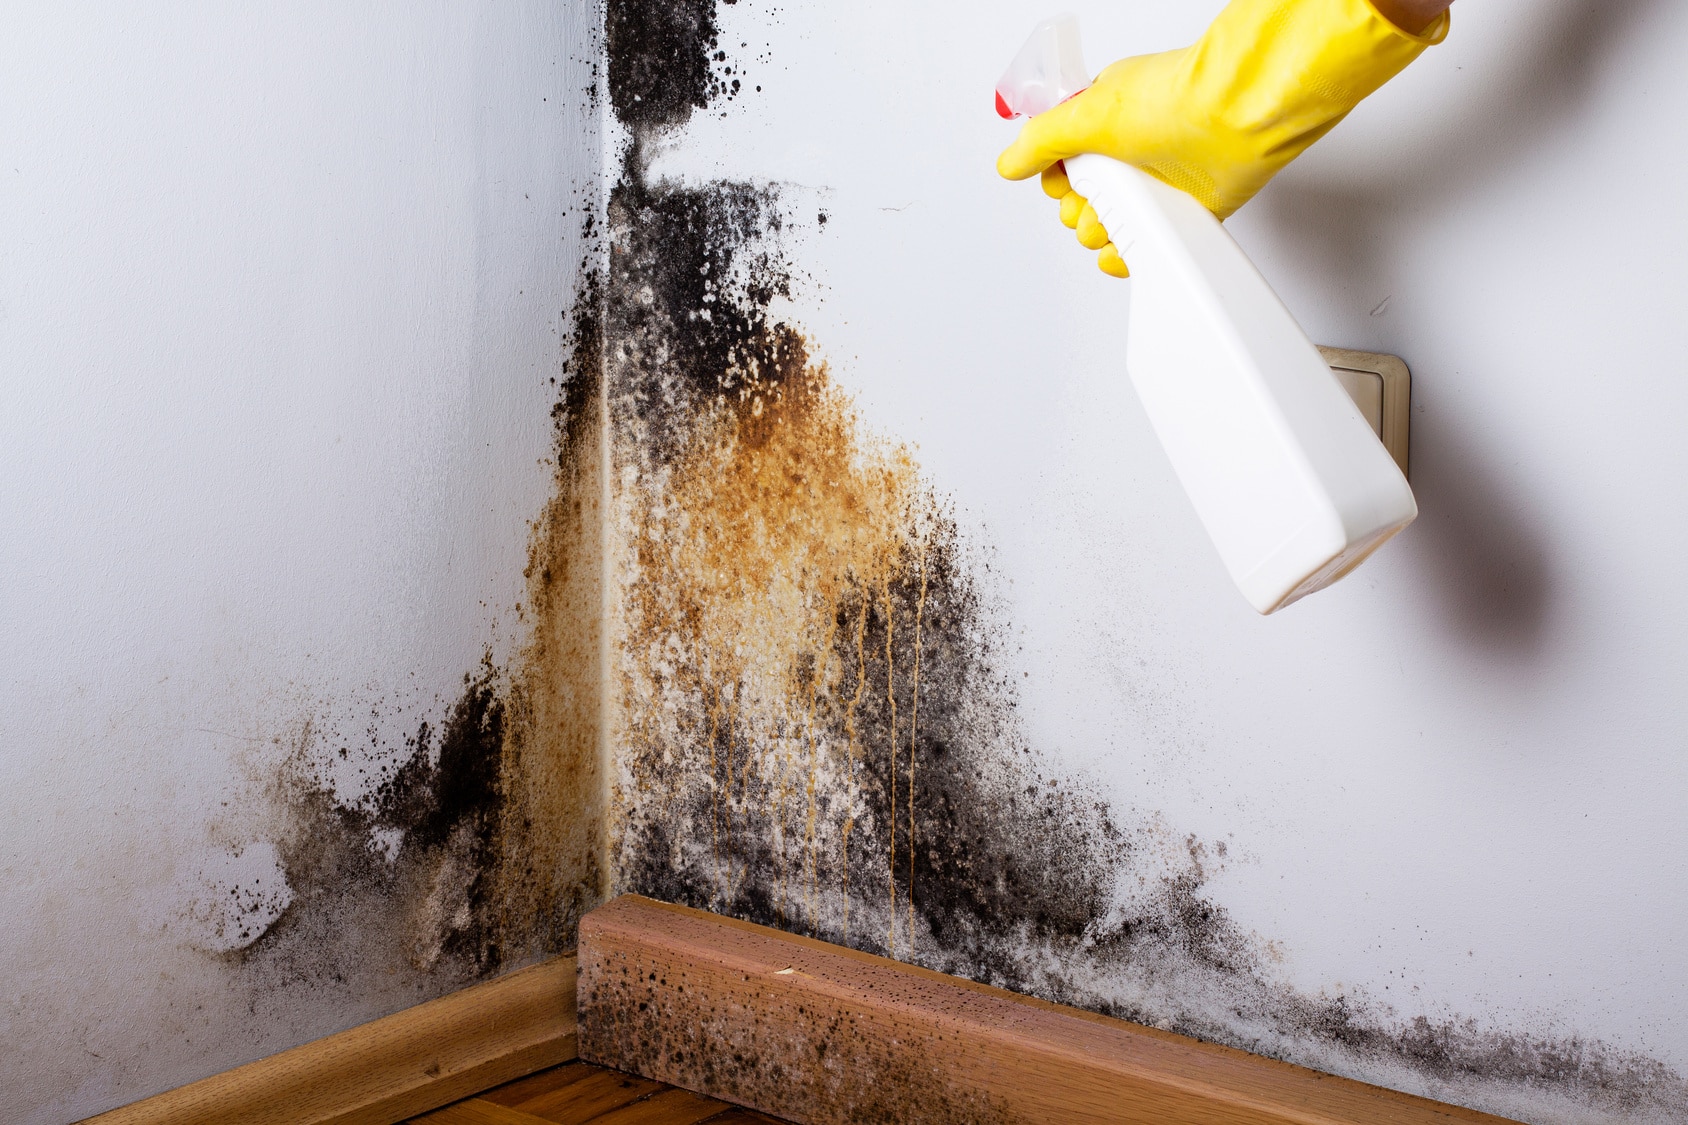 How to Prevent Mold Growth in Winter - Mold Prevention Tips and Guide